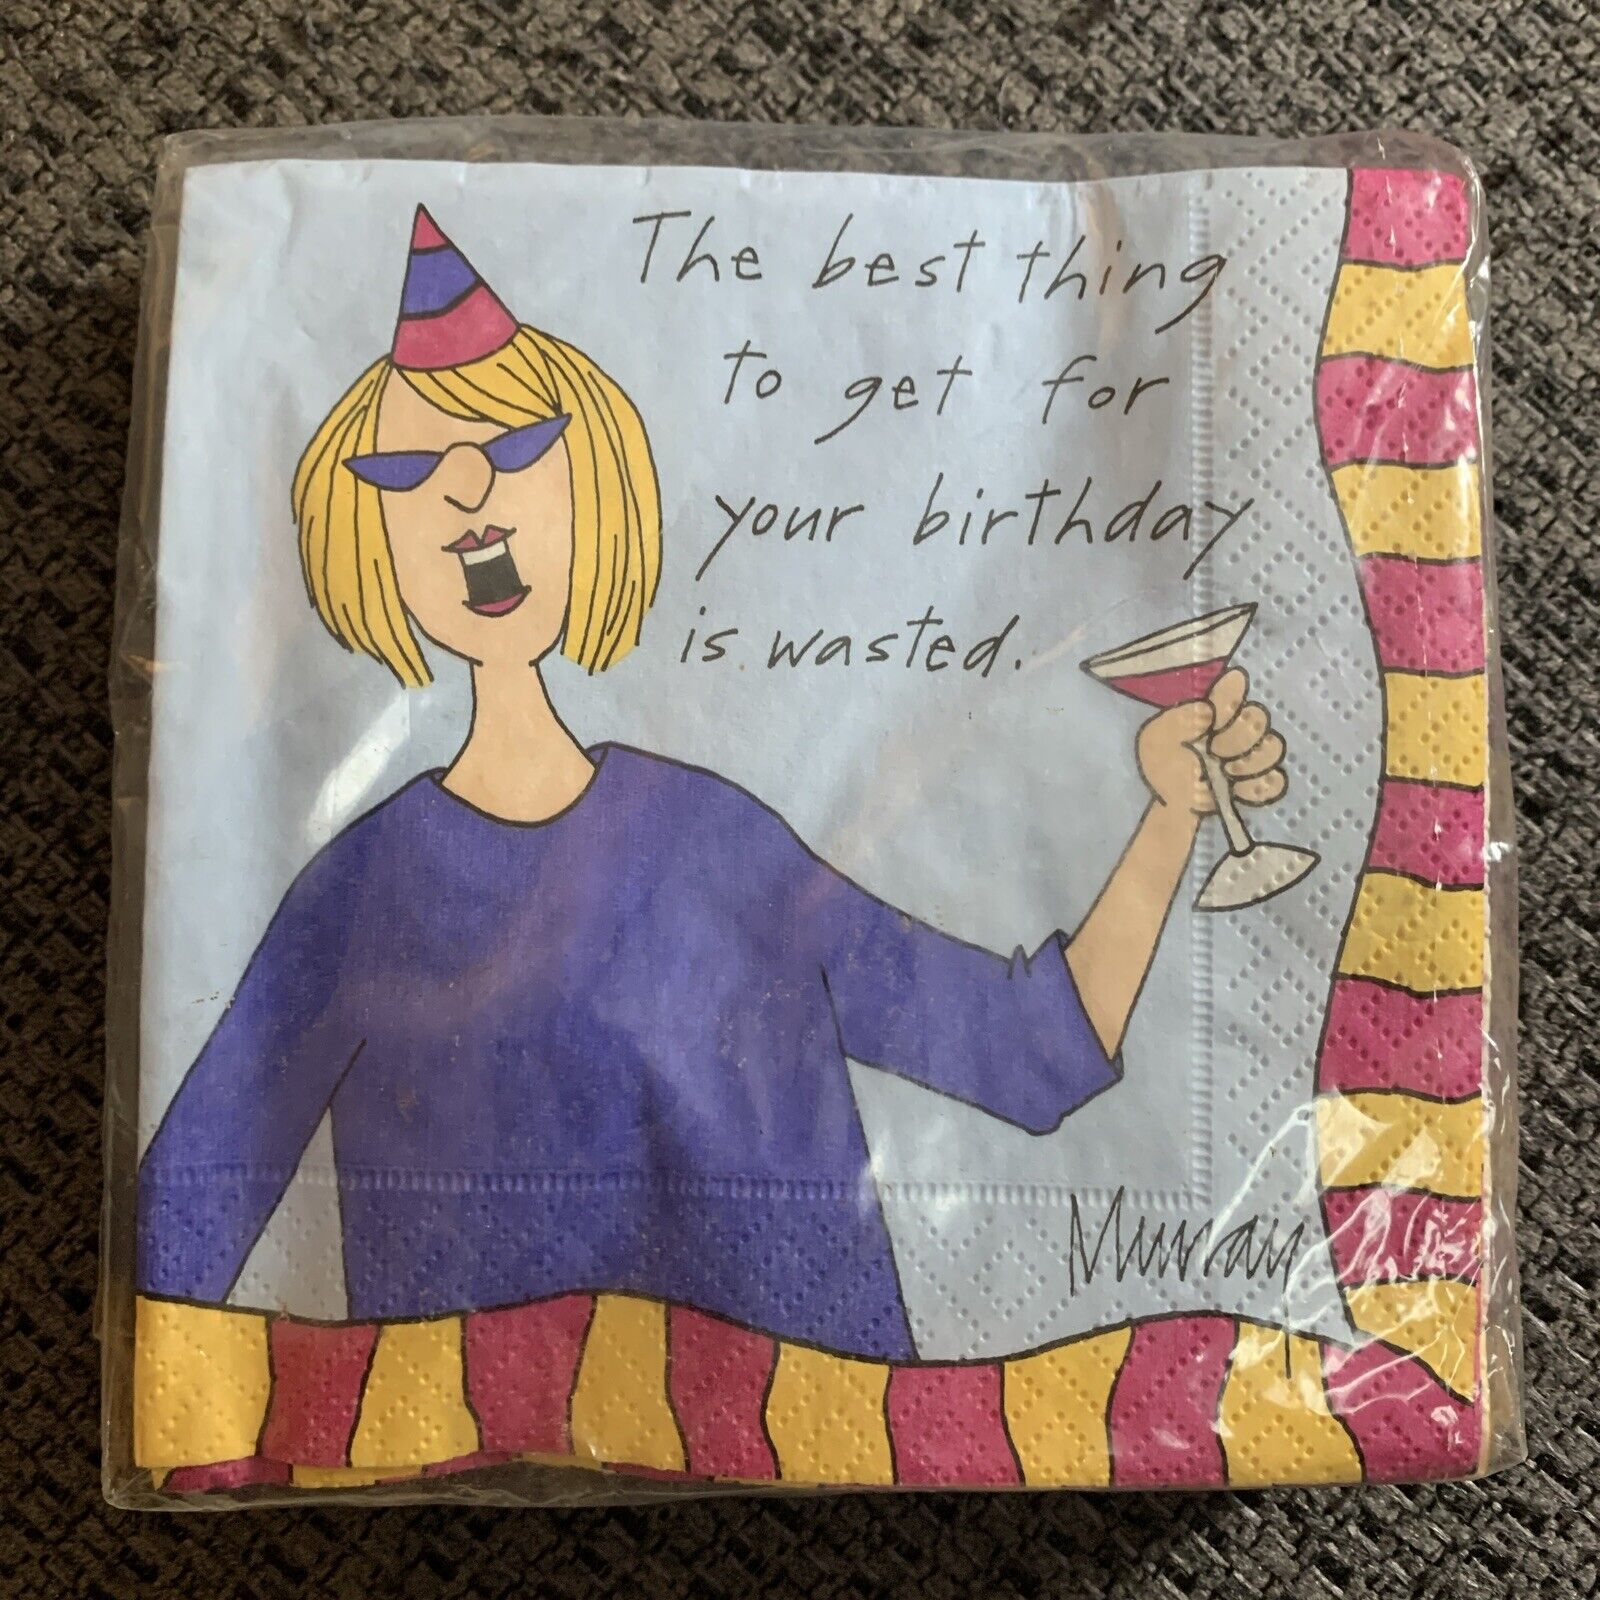 Rare Vintage Murrays Law Party Beverage Napkins “Birthday Wasted” Joke - New